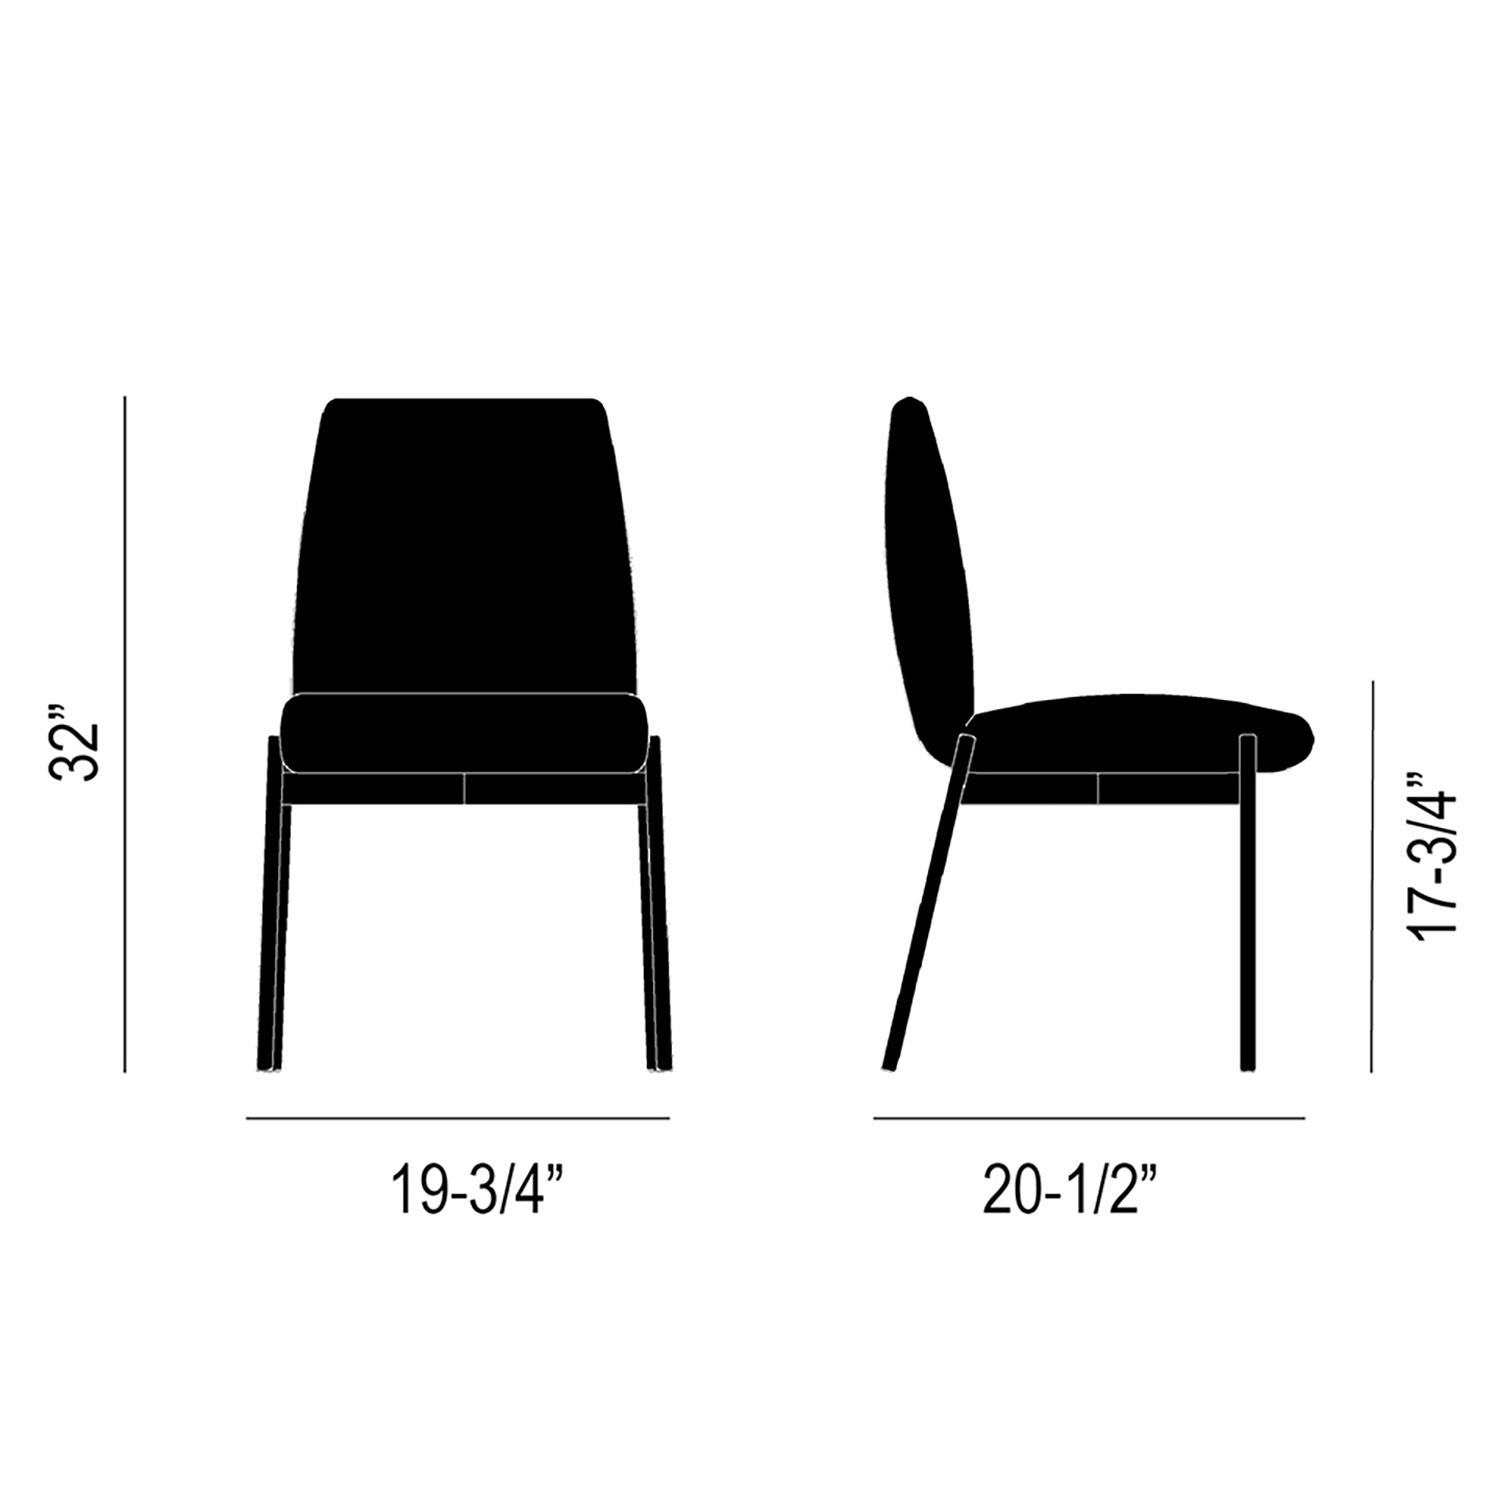 Capri Dining Chair Product Silhouette